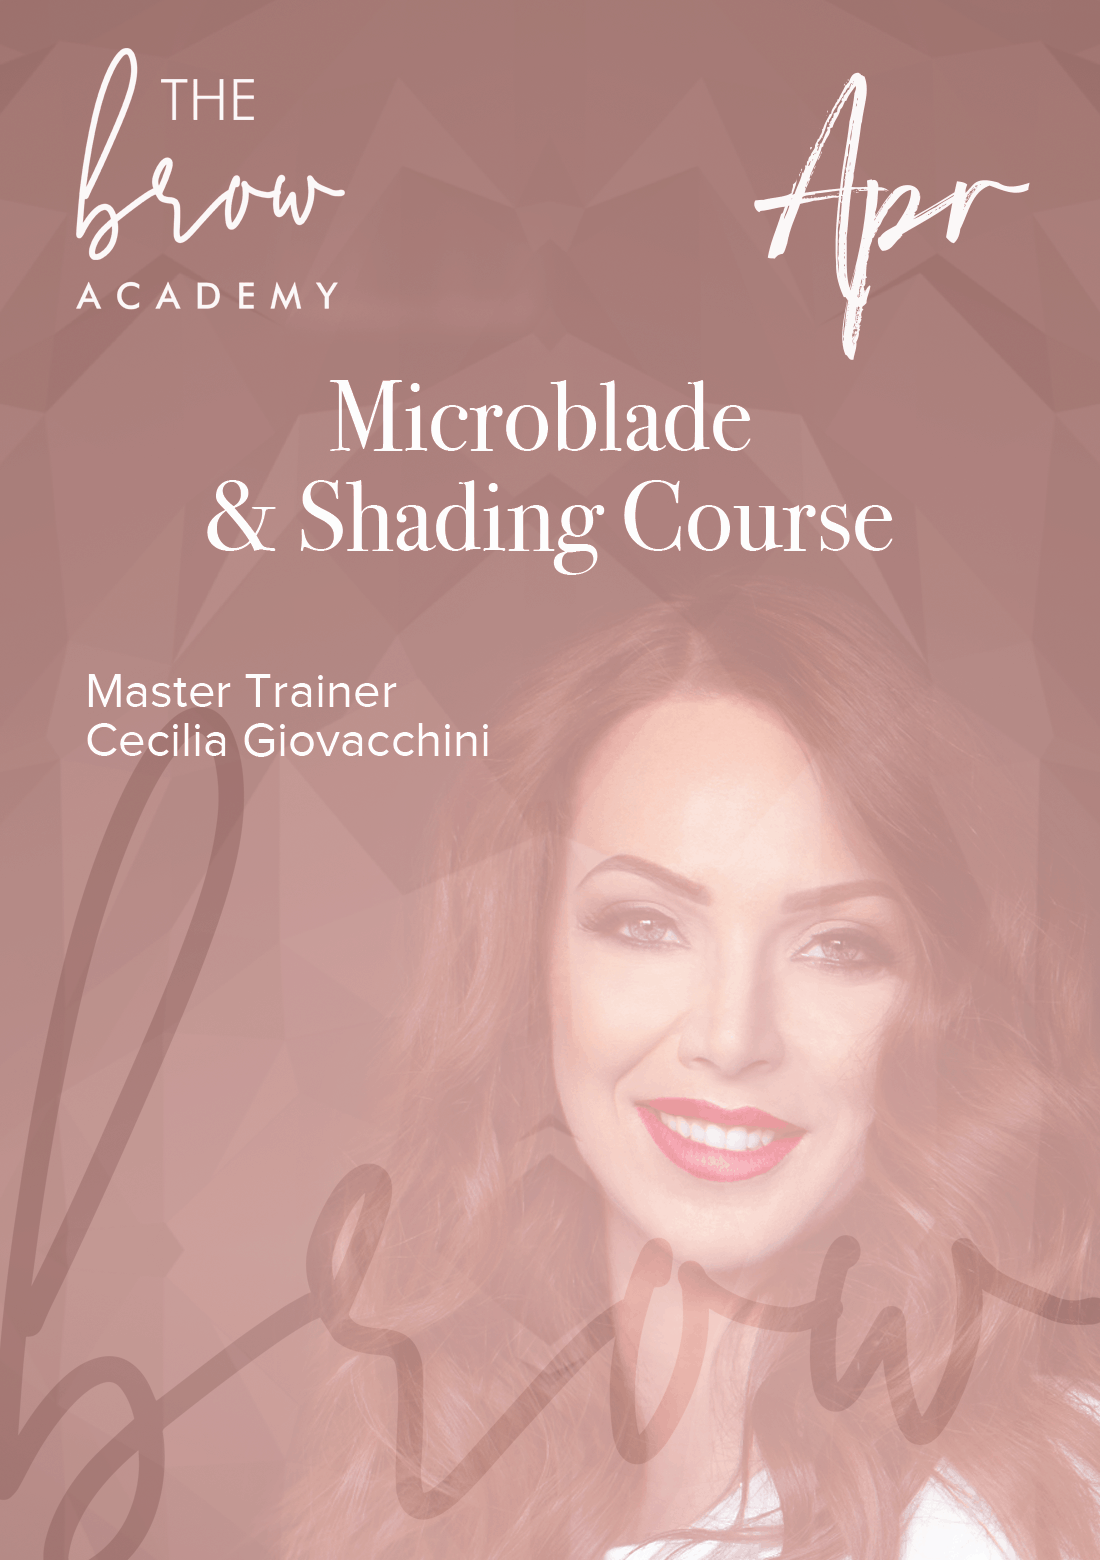 East Bay Microblading Courses - April